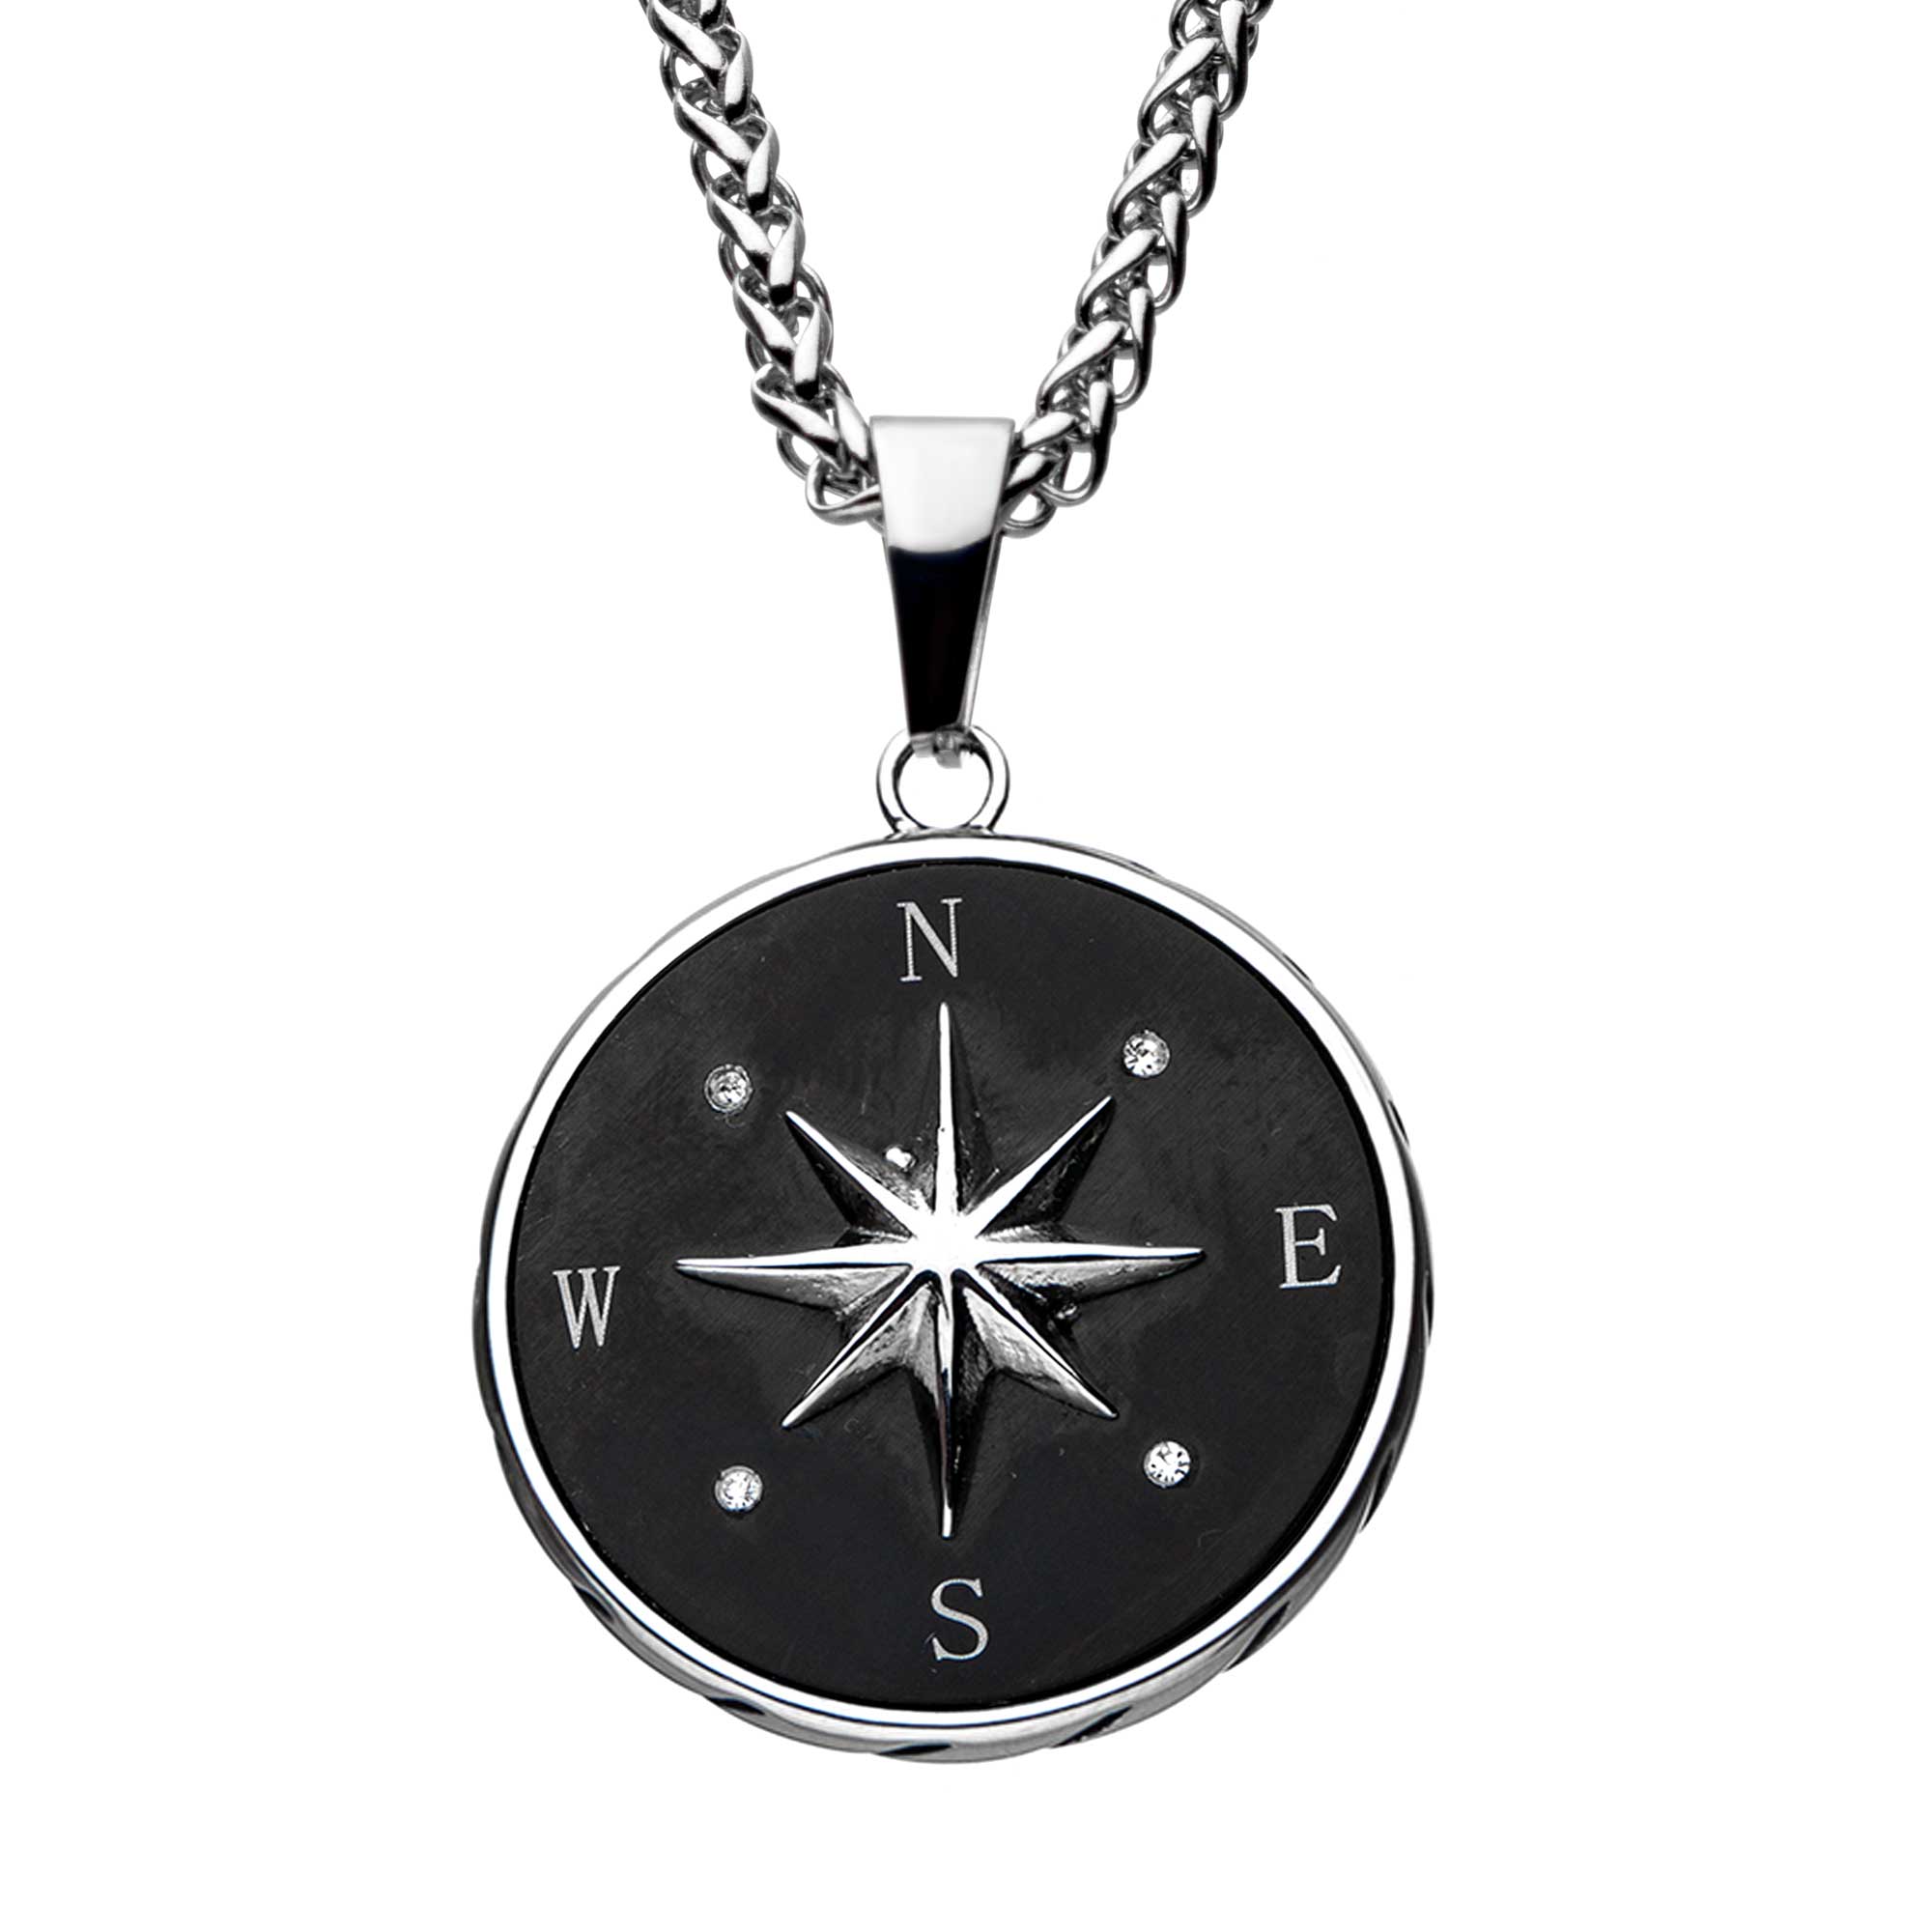 Stainless Steel and Black Plated Compass Pendant with Chain Milano Jewelers Pembroke Pines, FL